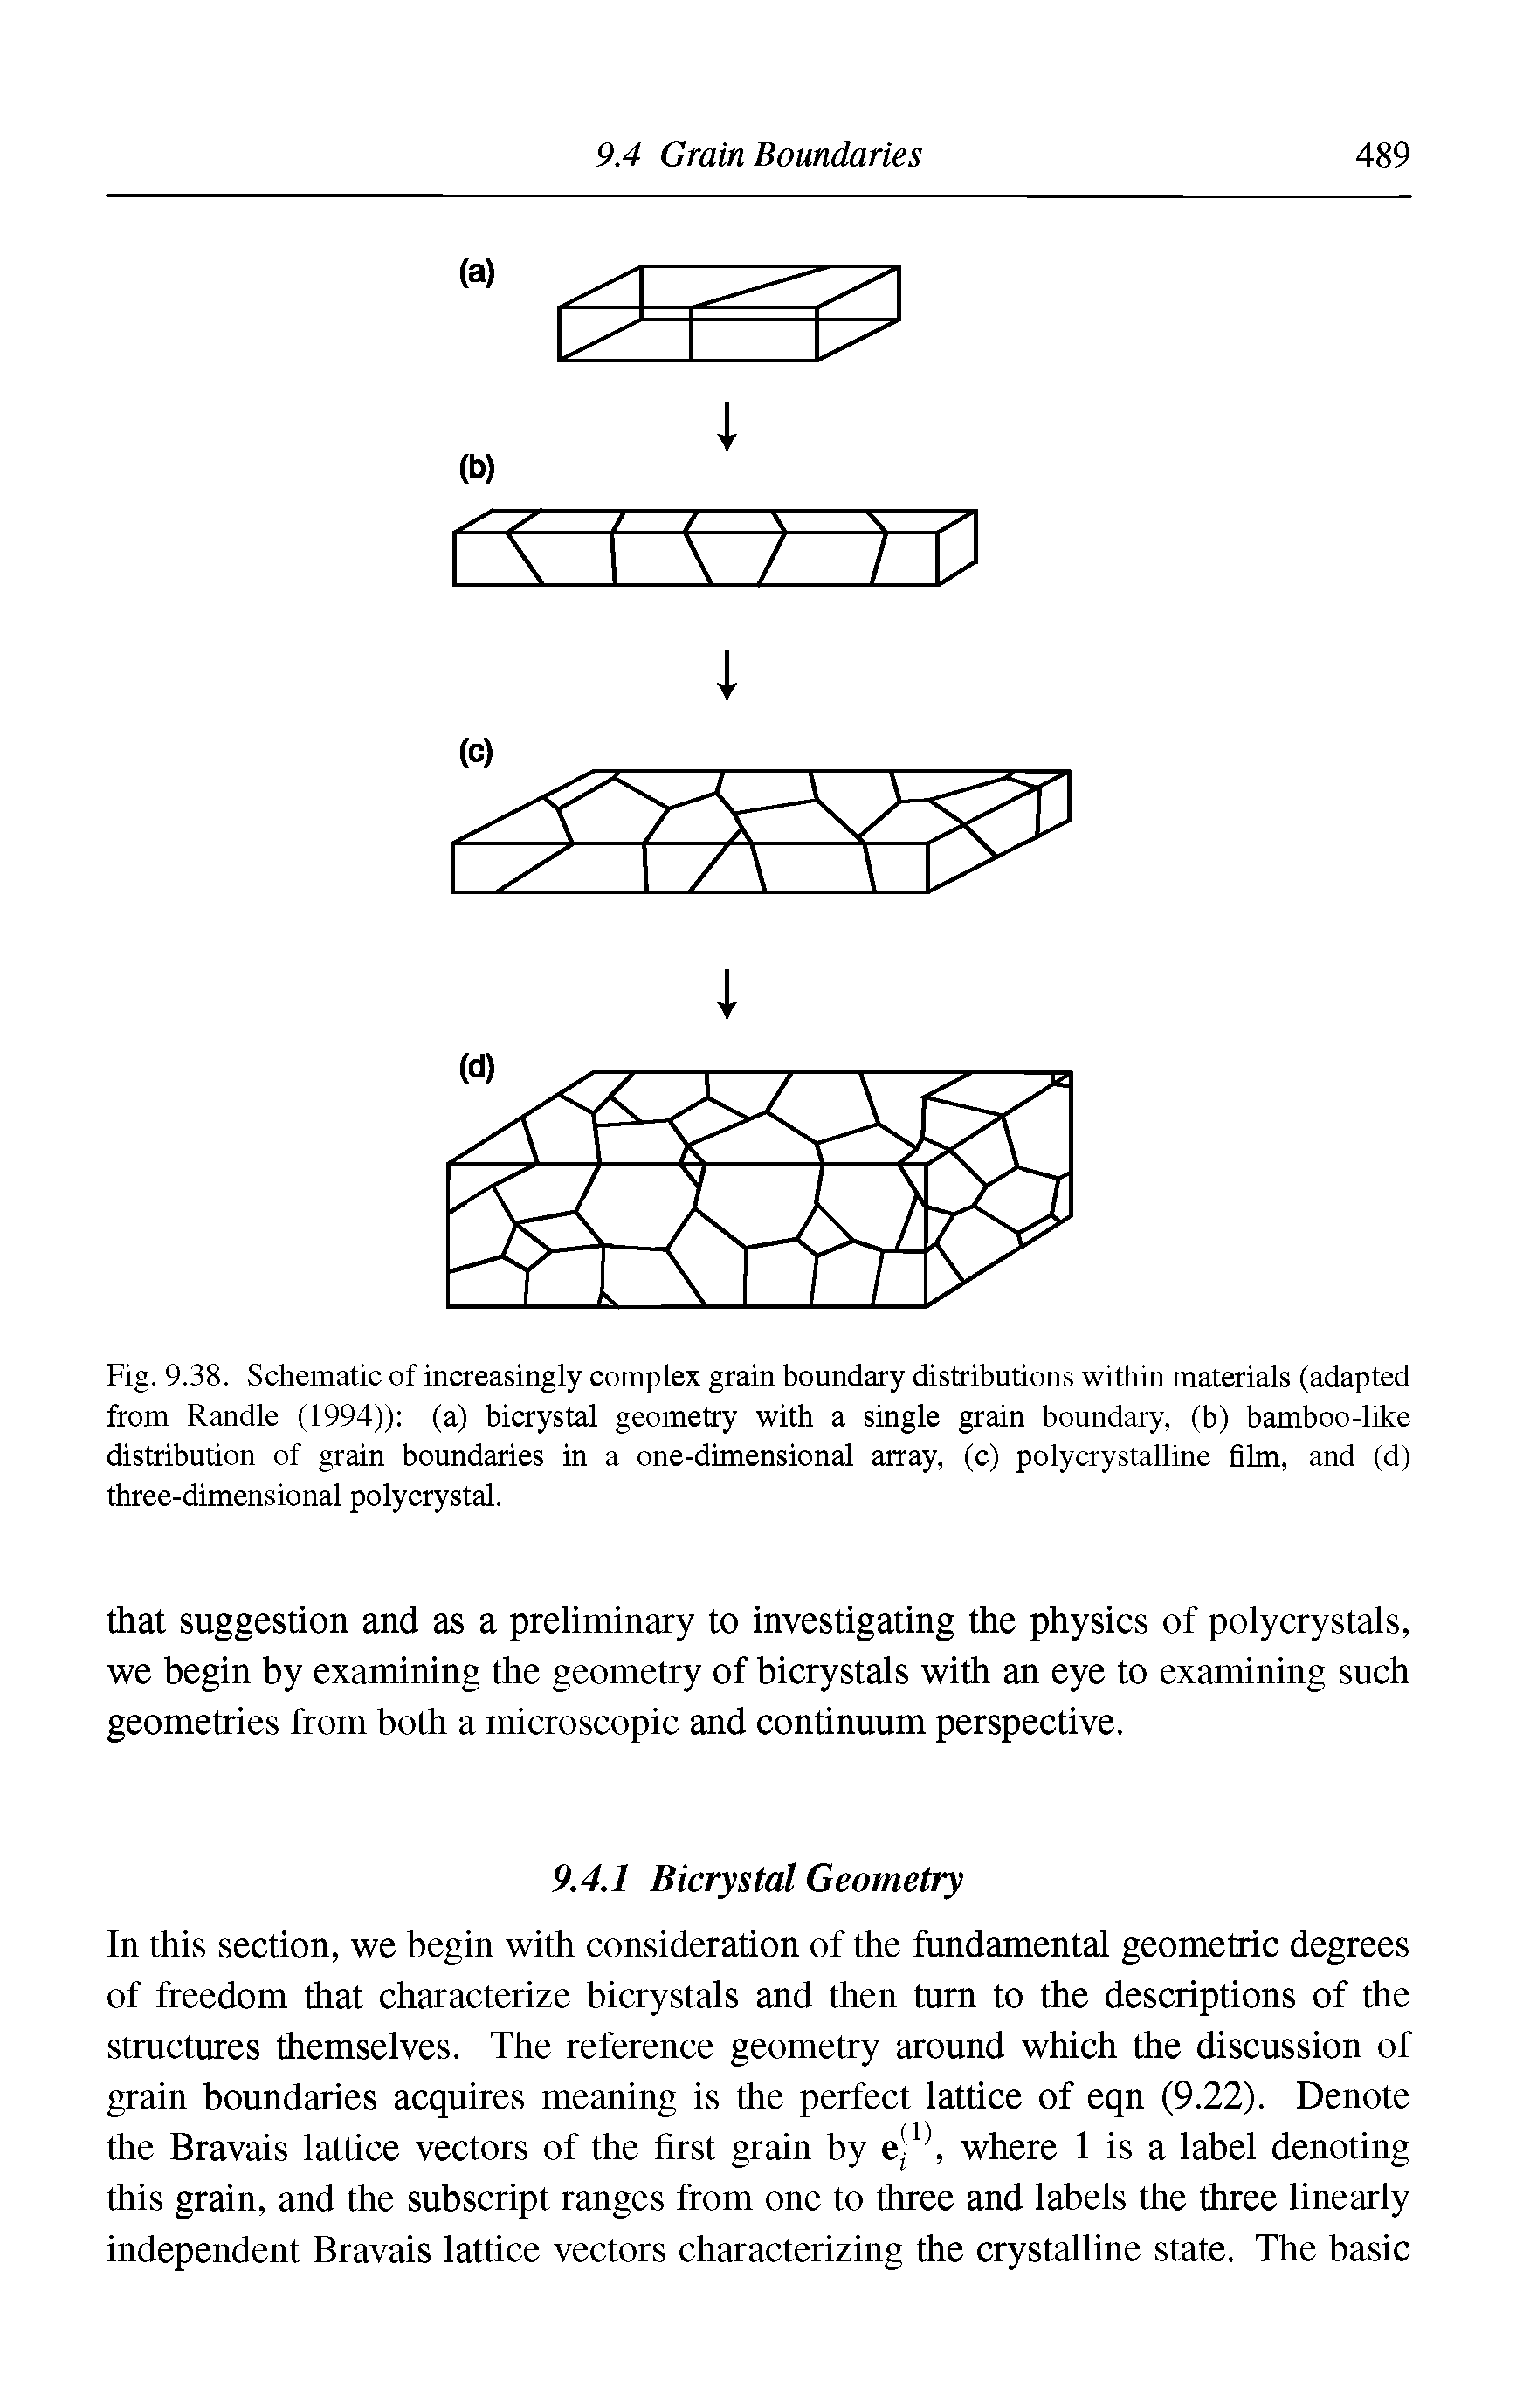 Fig. 9.38. Schematic of increasingly complex grain boundary distributions within materials (adapted from Randle (1994)) (a) bicrystal geometry with a single grain boundary, (b) bamboo-like distribution of grain boundaries in a one-dimensional array, (c) polycrystalline film, and (d) three-dimensional polycrystal.